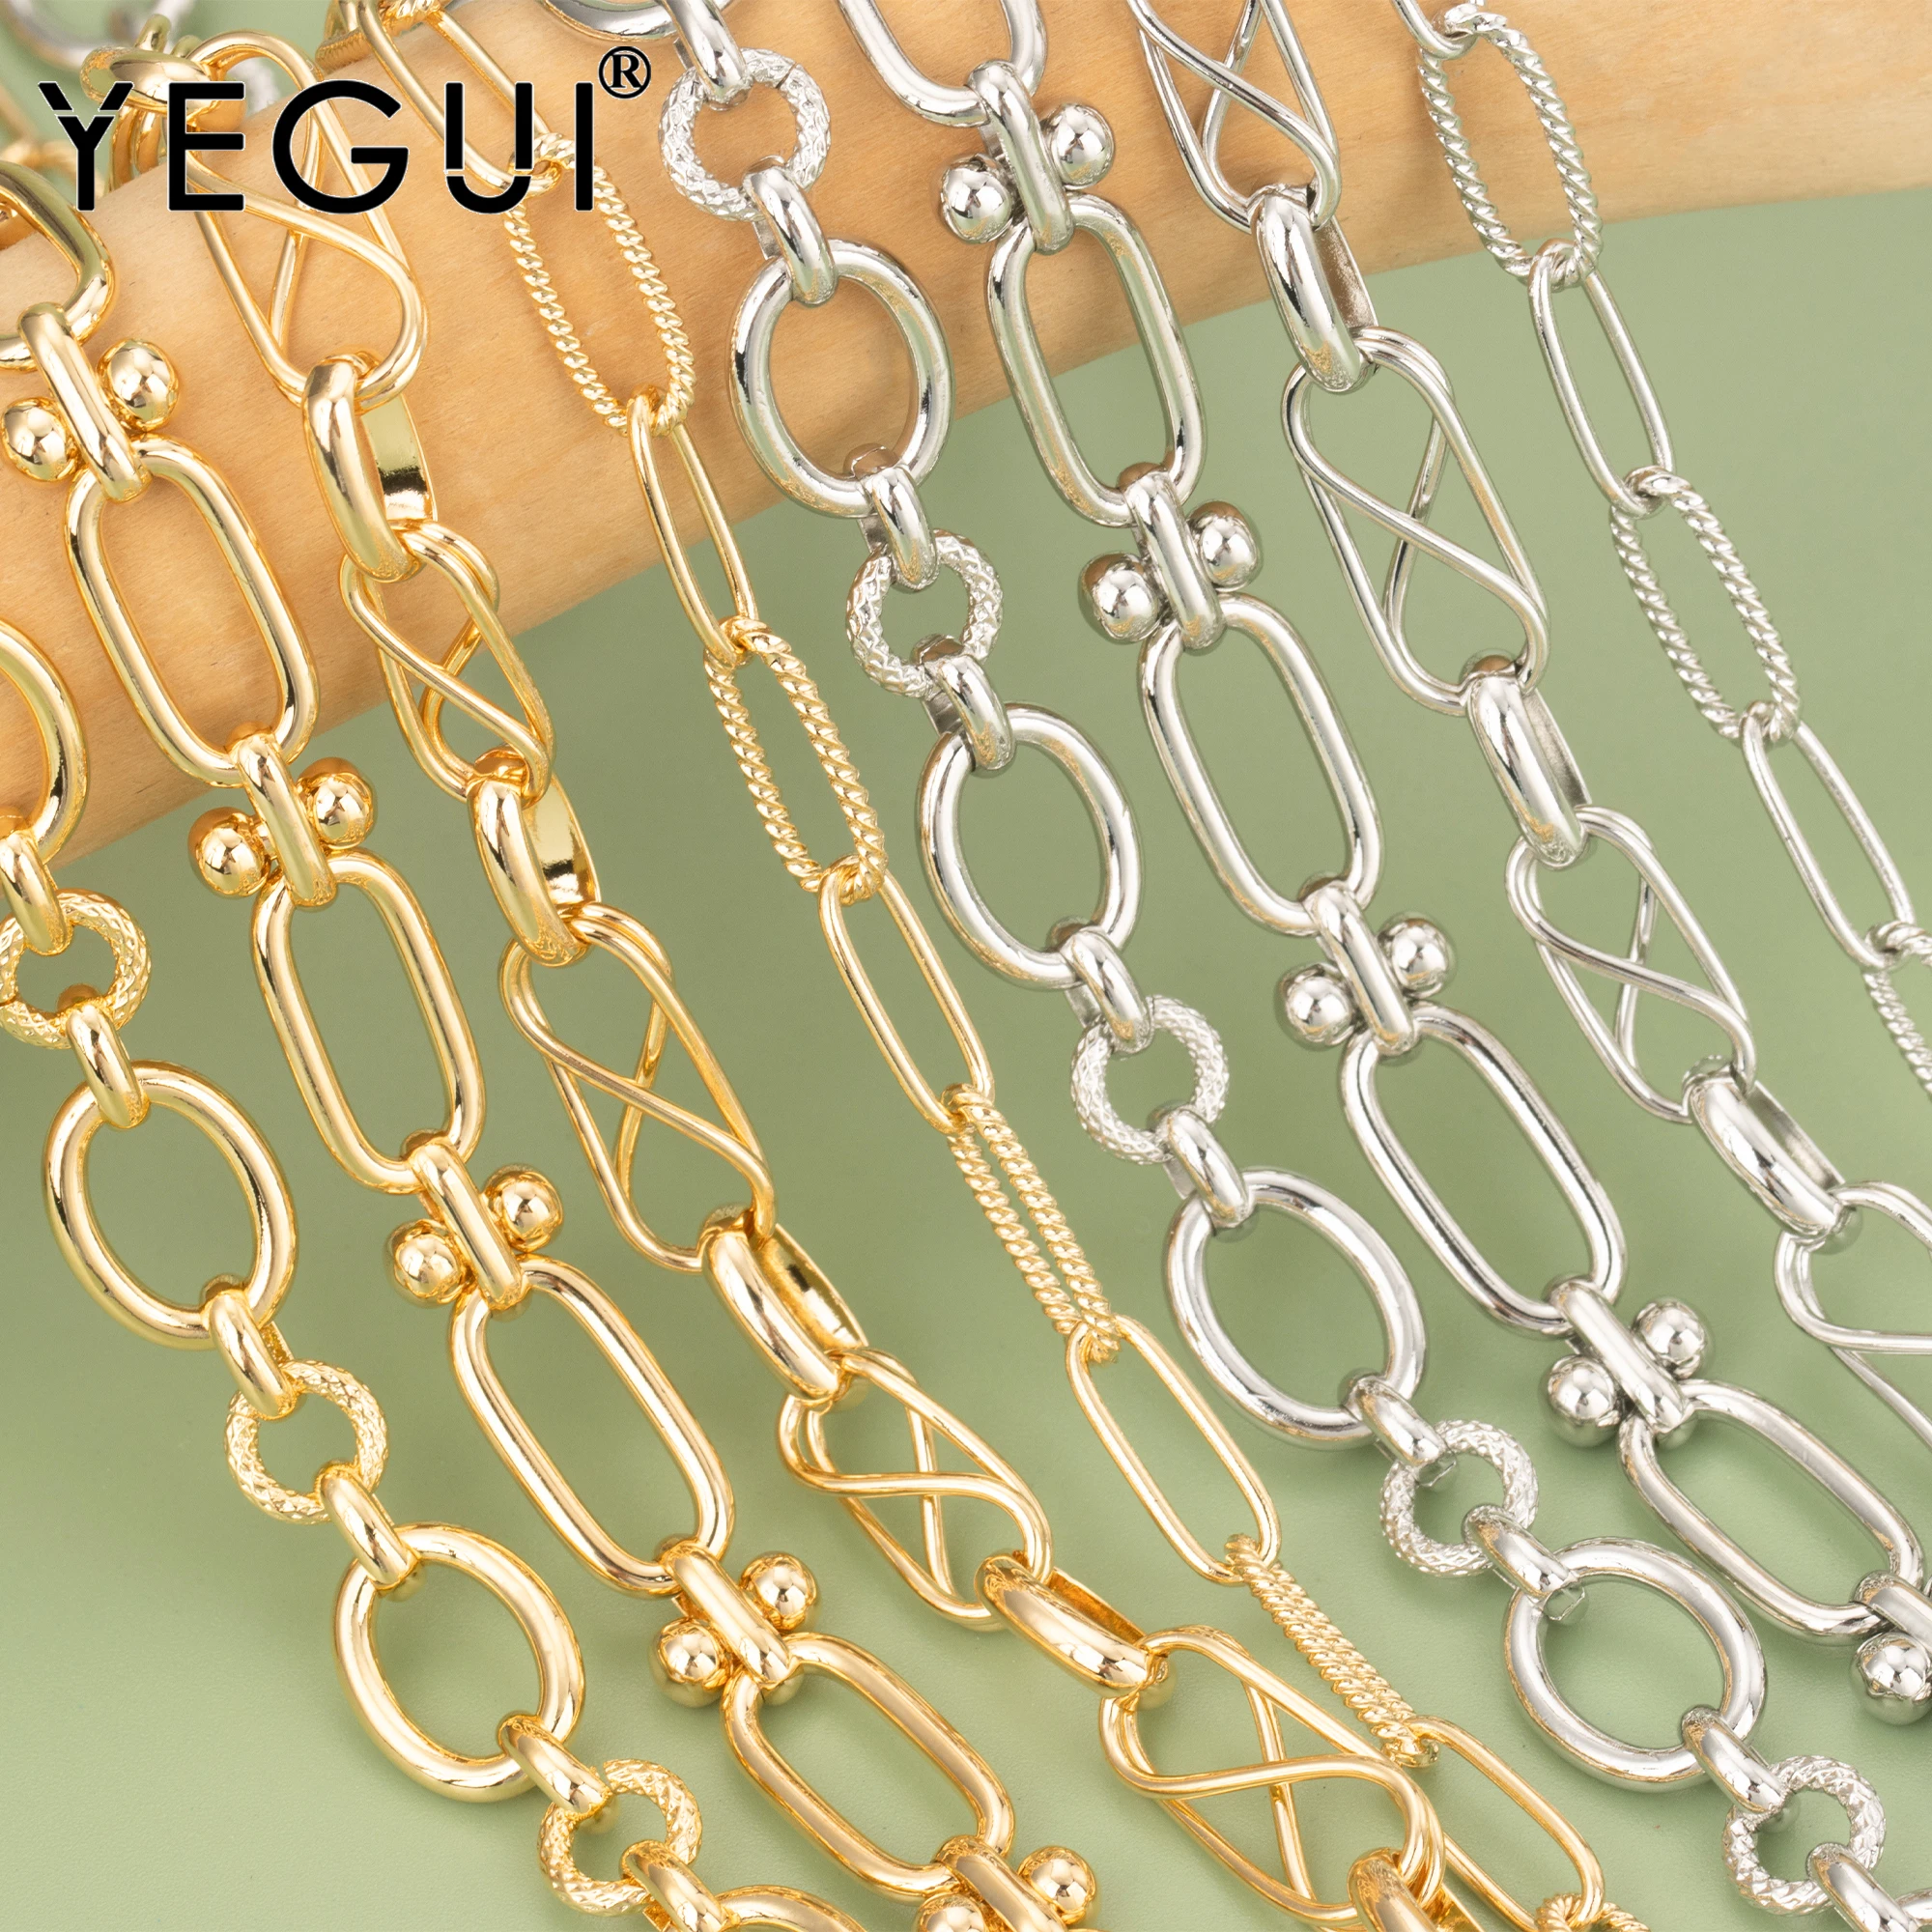 

YEGUI C169,diy chain,18k gold plated,0.3microns,copper metal,rhodium plated,charms,jewelry making,diy bracelet necklace,1m/lot